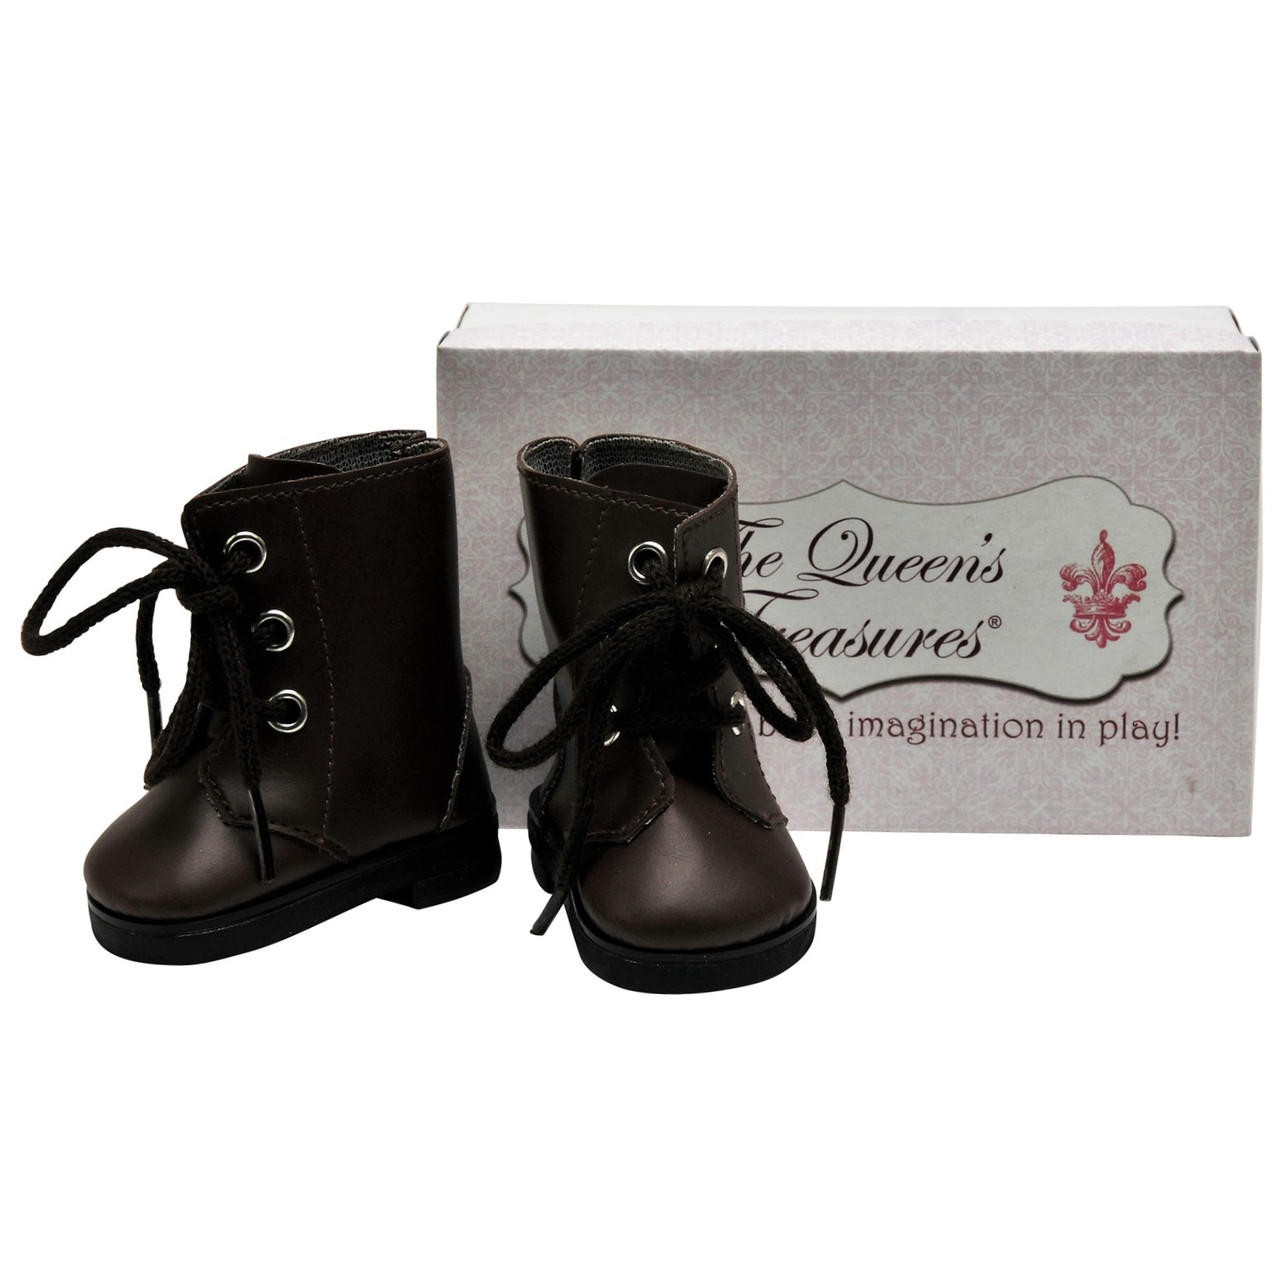 https://cdn11.bigcommerce.com/s-m5vcu70215/images/stencil/1280x1280/products/182/2639/the-queens-treasures-brown-lace-up-boots-and-shoe-box-for-18-inch-dolls__64946.1692300282.jpg?c=1